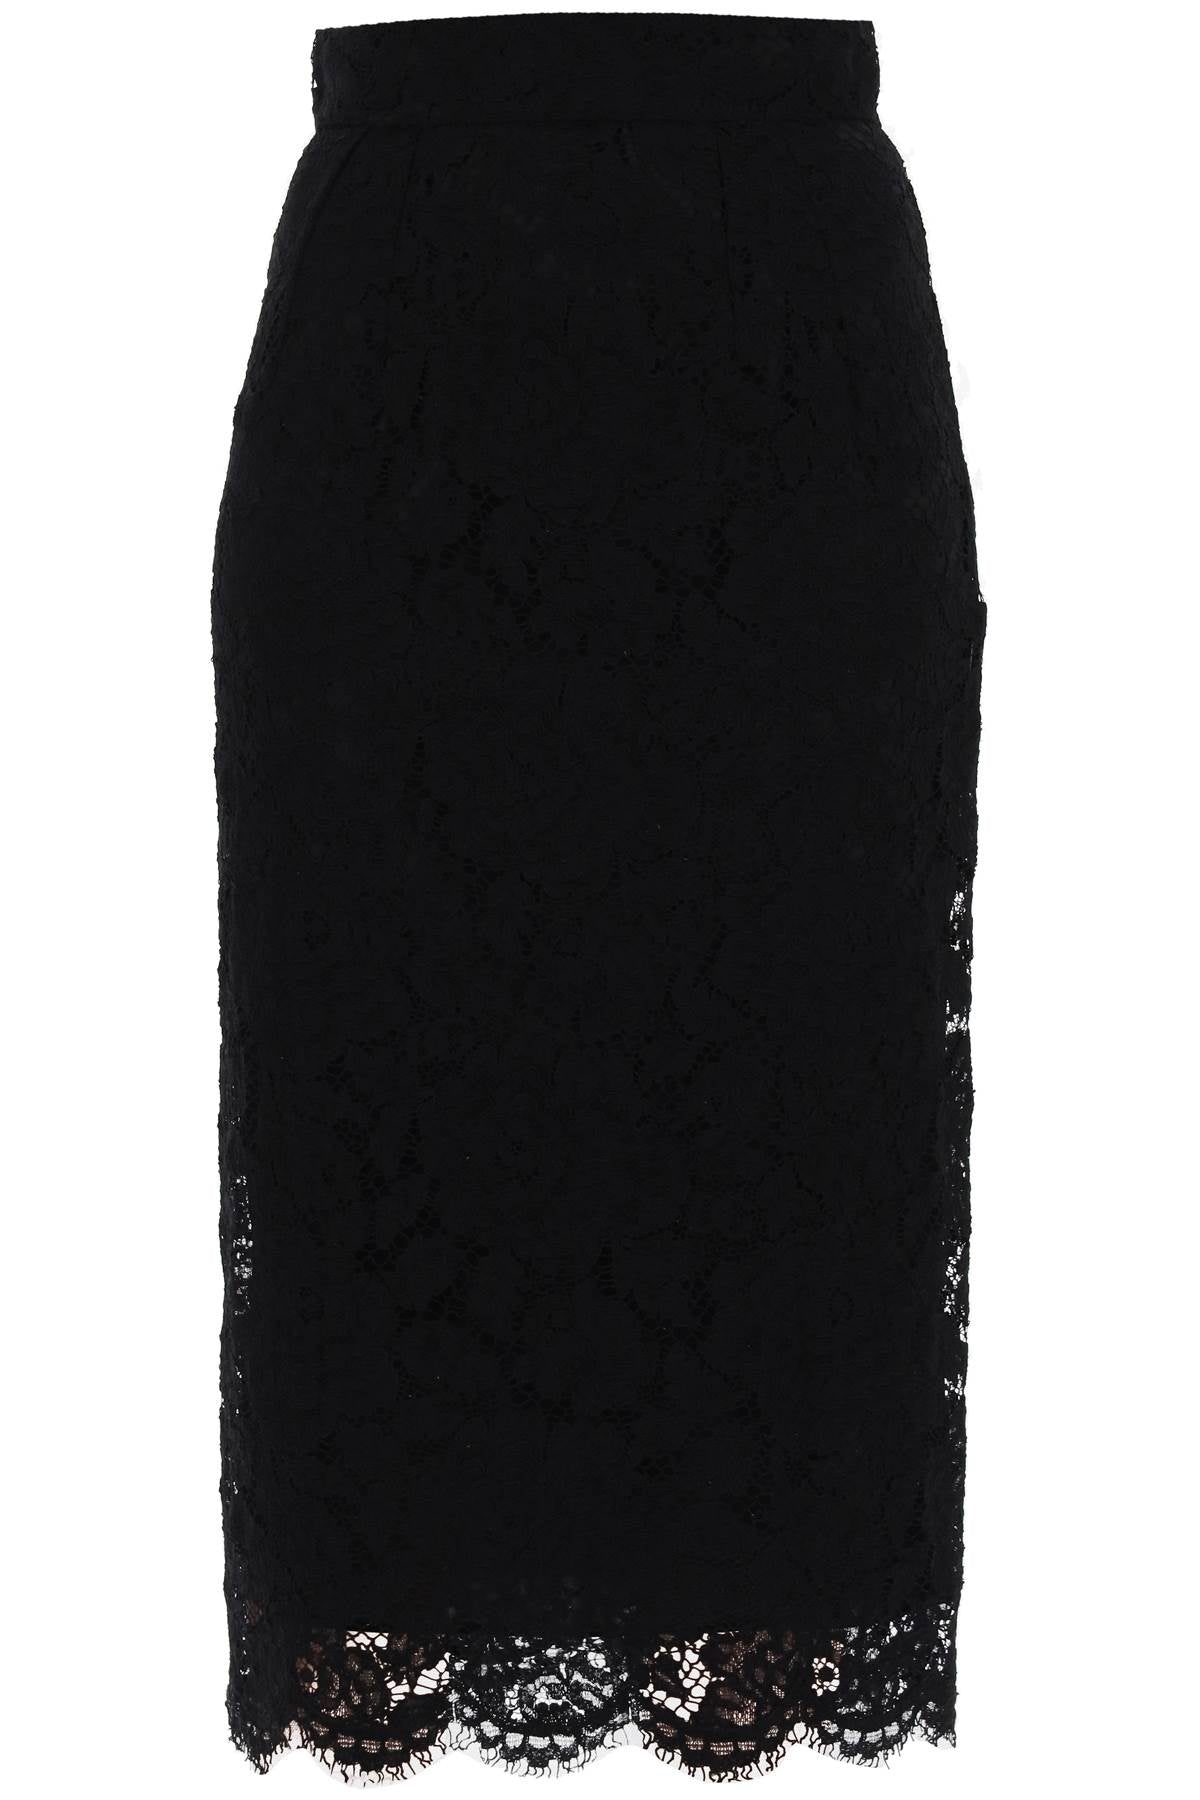 Dolce & gabbana lace pencil skirt with tube silhouette F4B7IT FLRE1 NERO